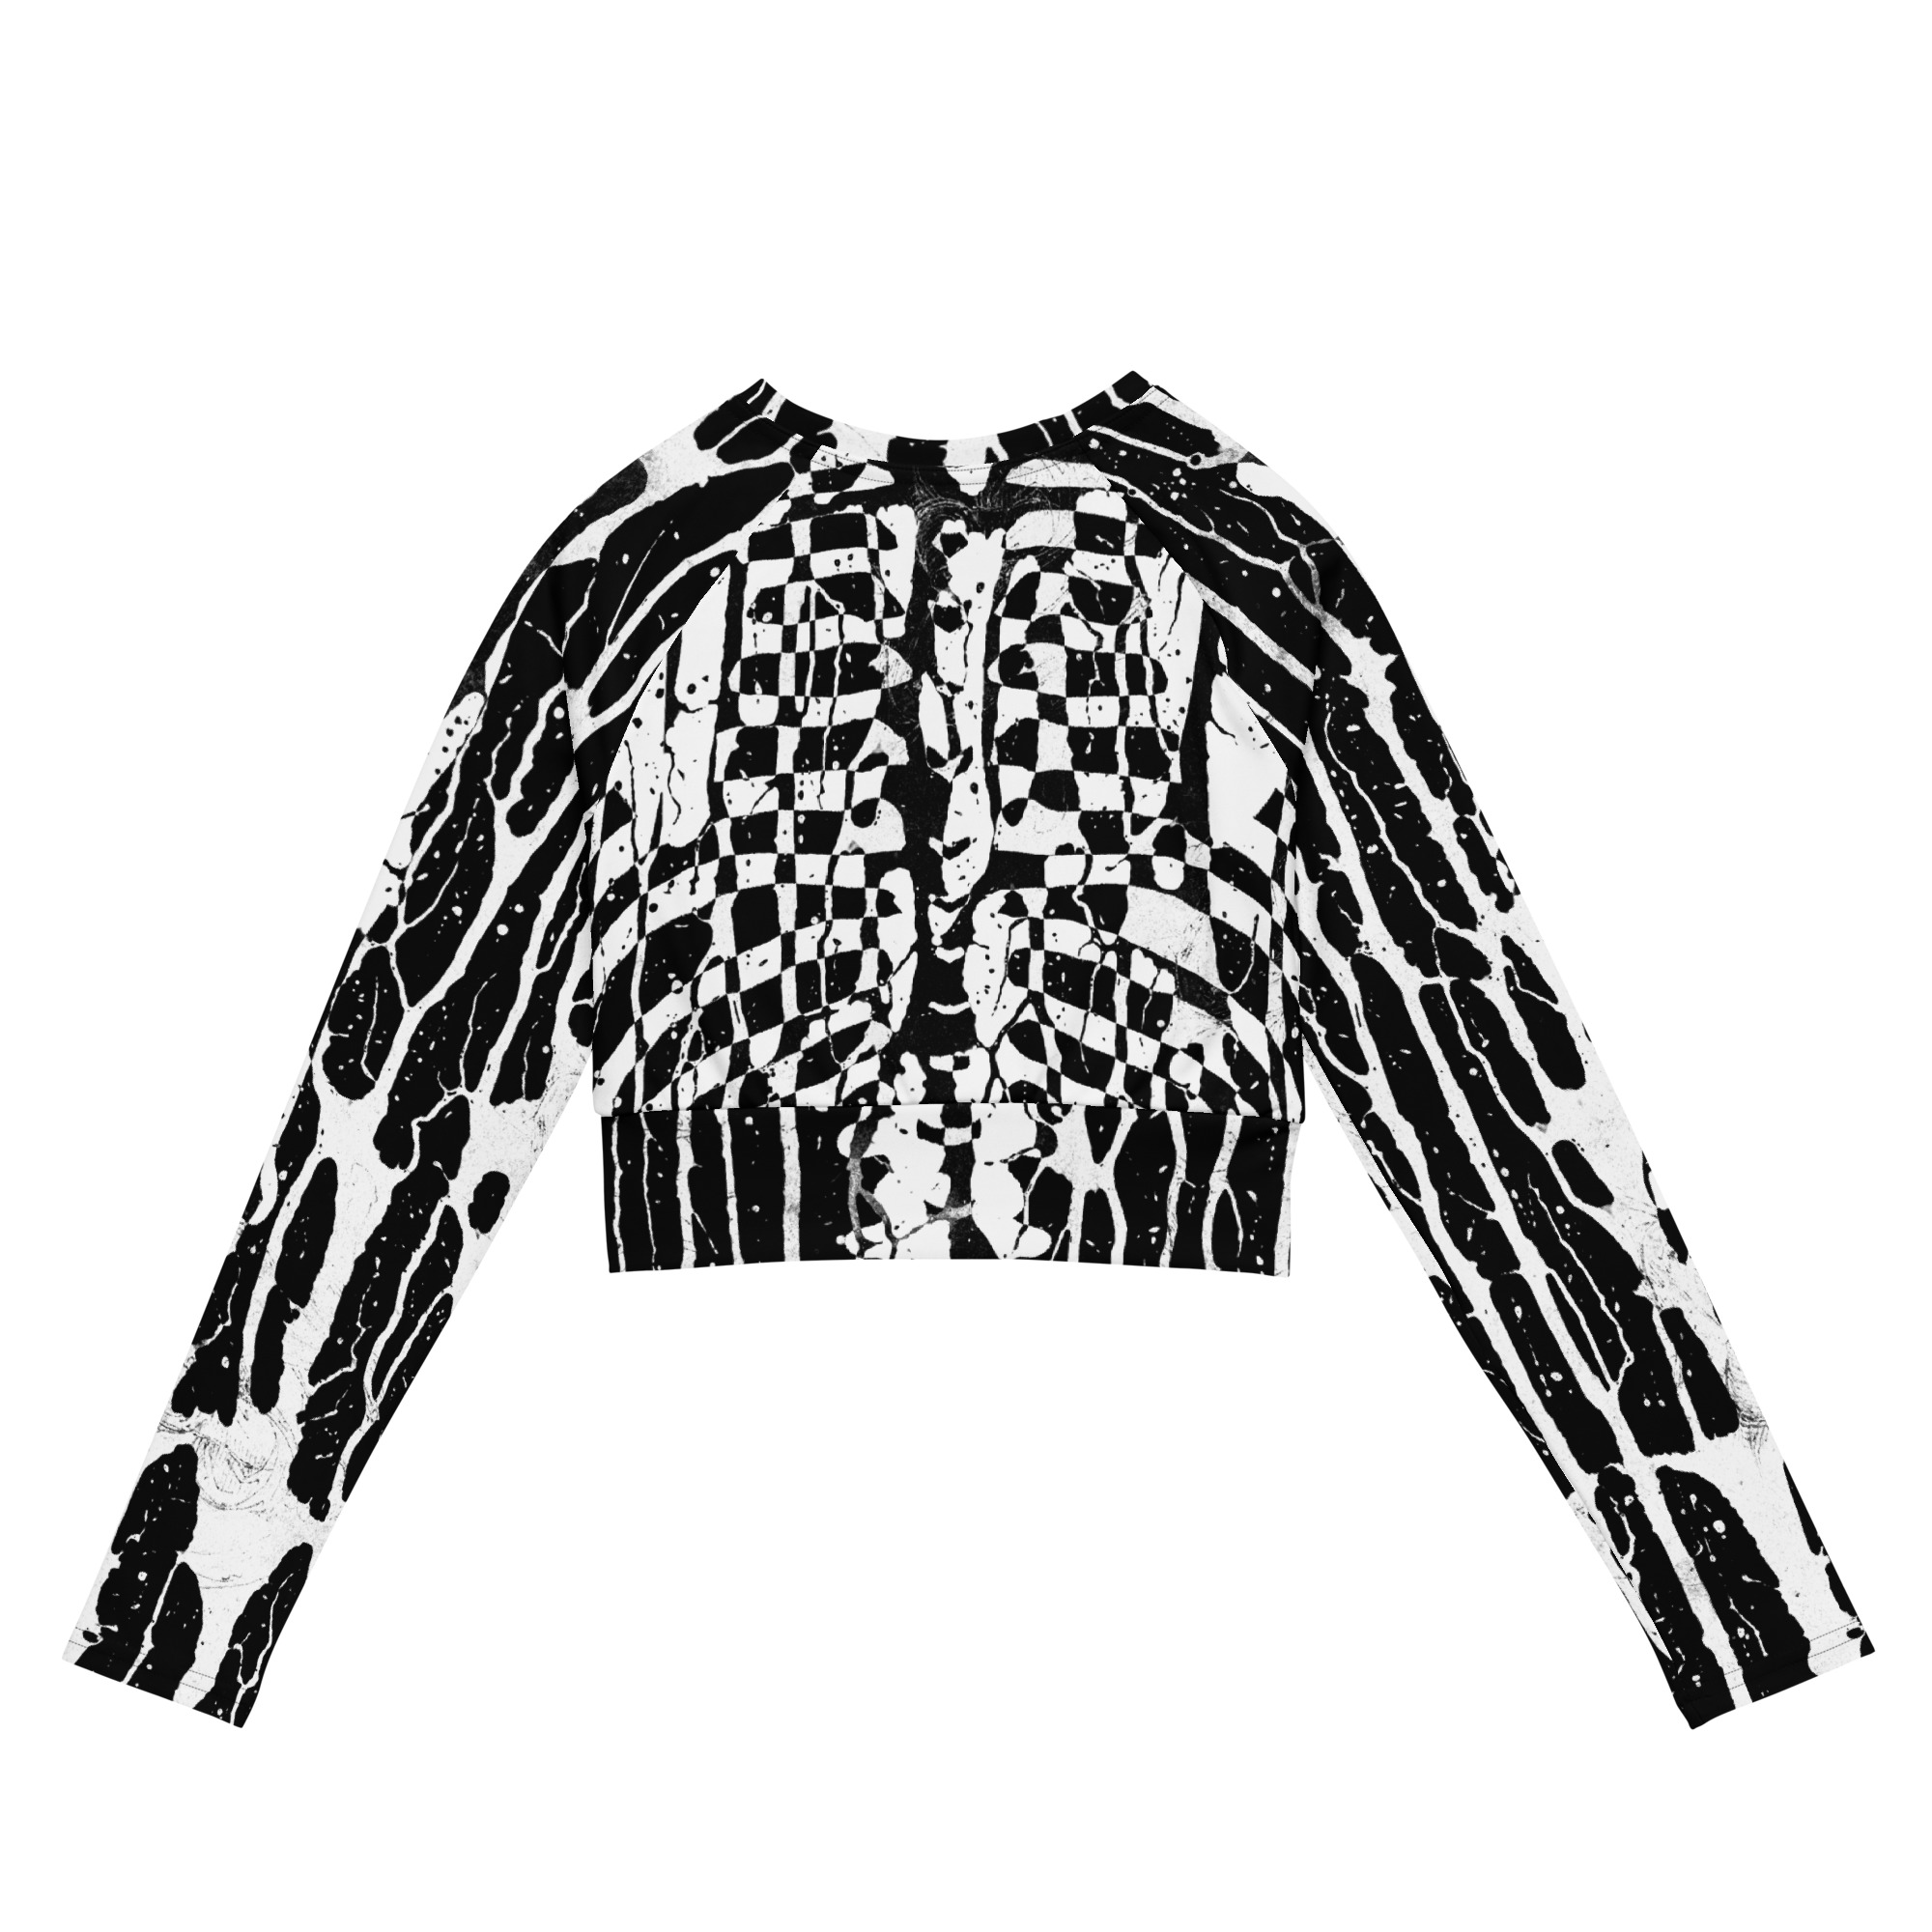 Featured image for “Grunge drip bones - athletic Recycled long-sleeve crop top”